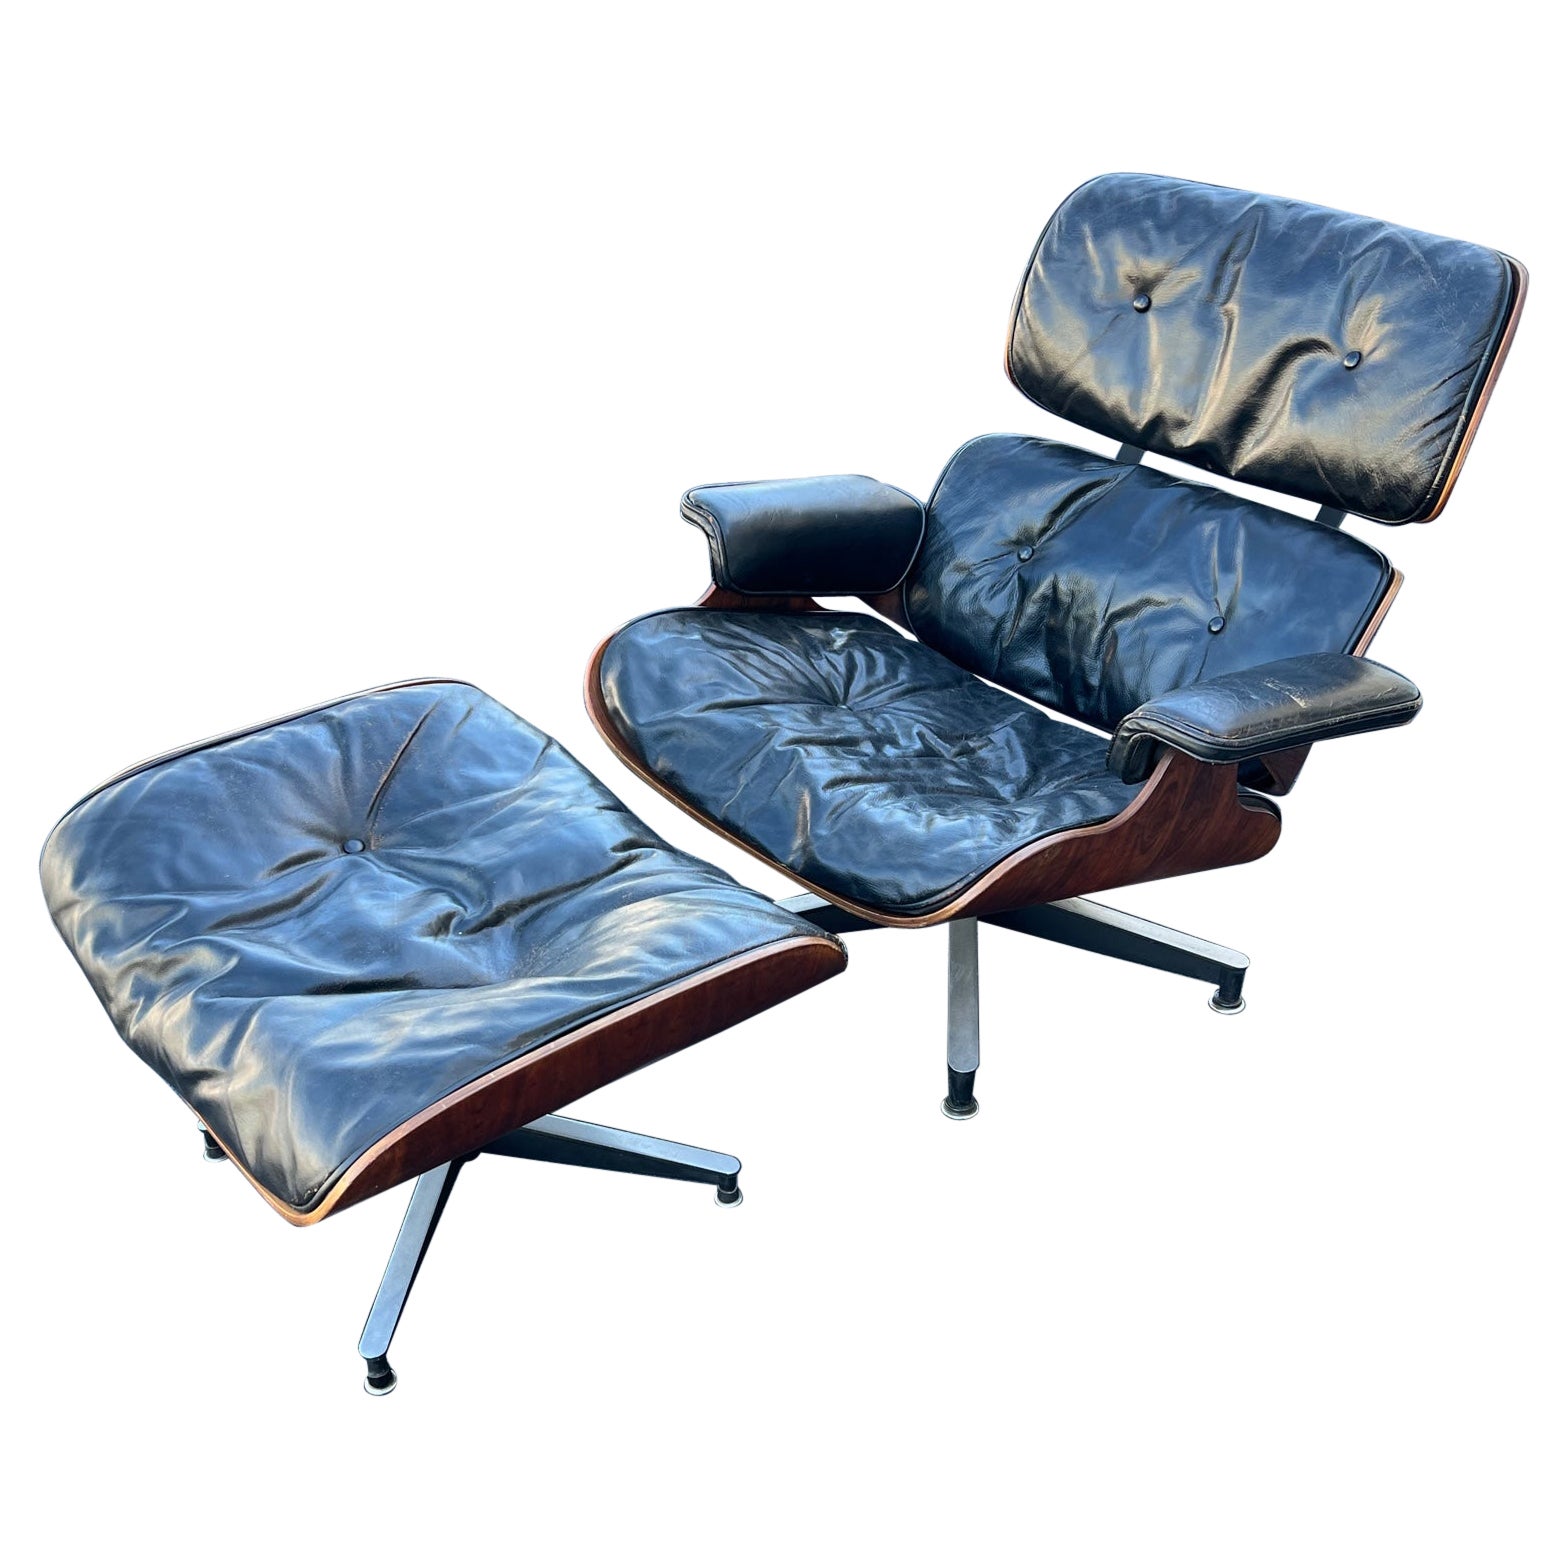 Original Charles Eames Herman Miller Lounge Chair and Ottoman 1959 For Sale